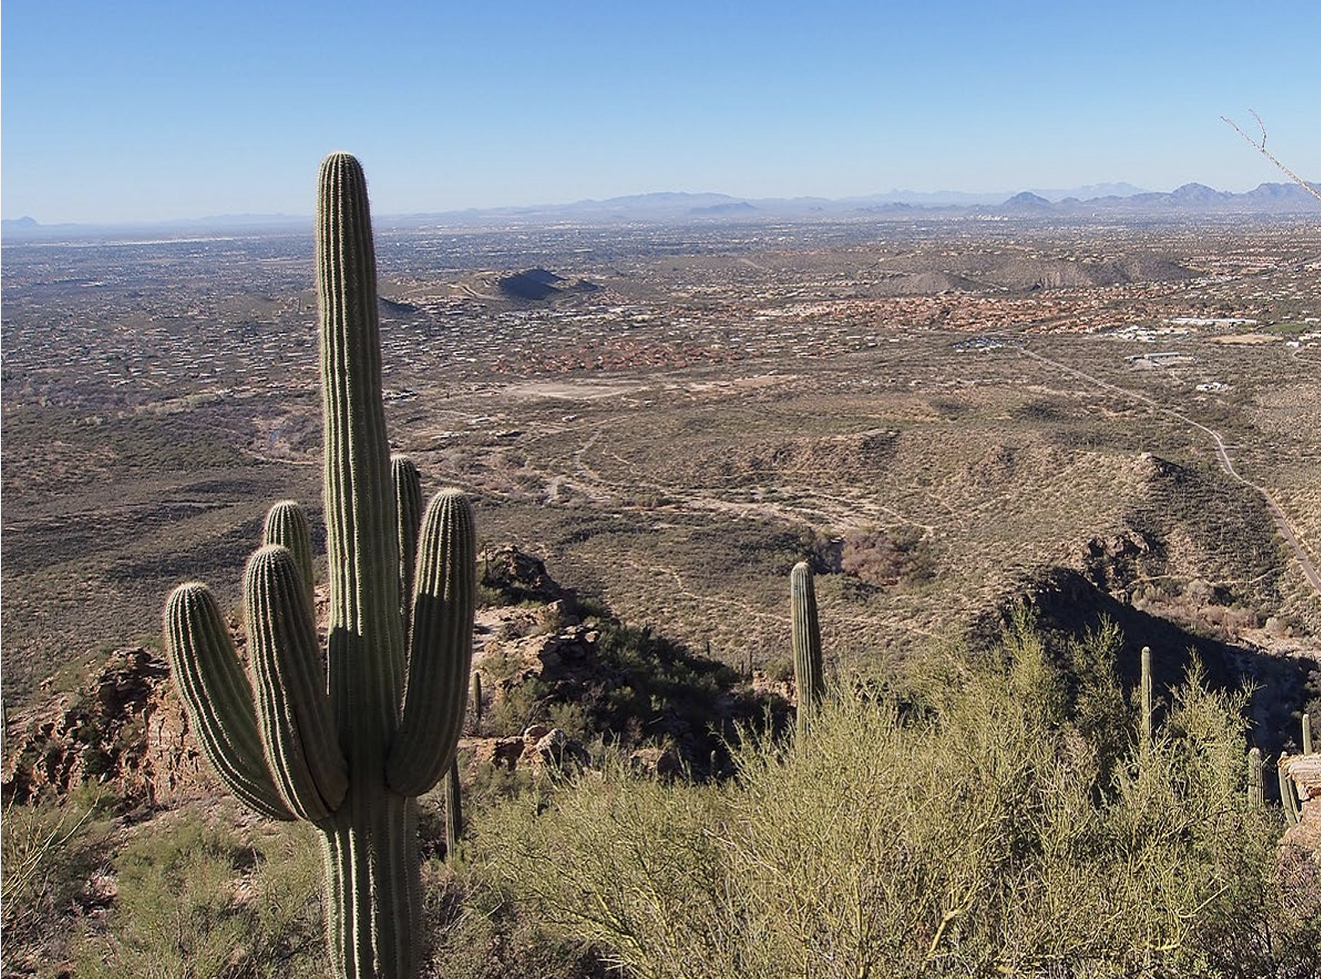 Cactus in foreground on a mountain with city development in the background